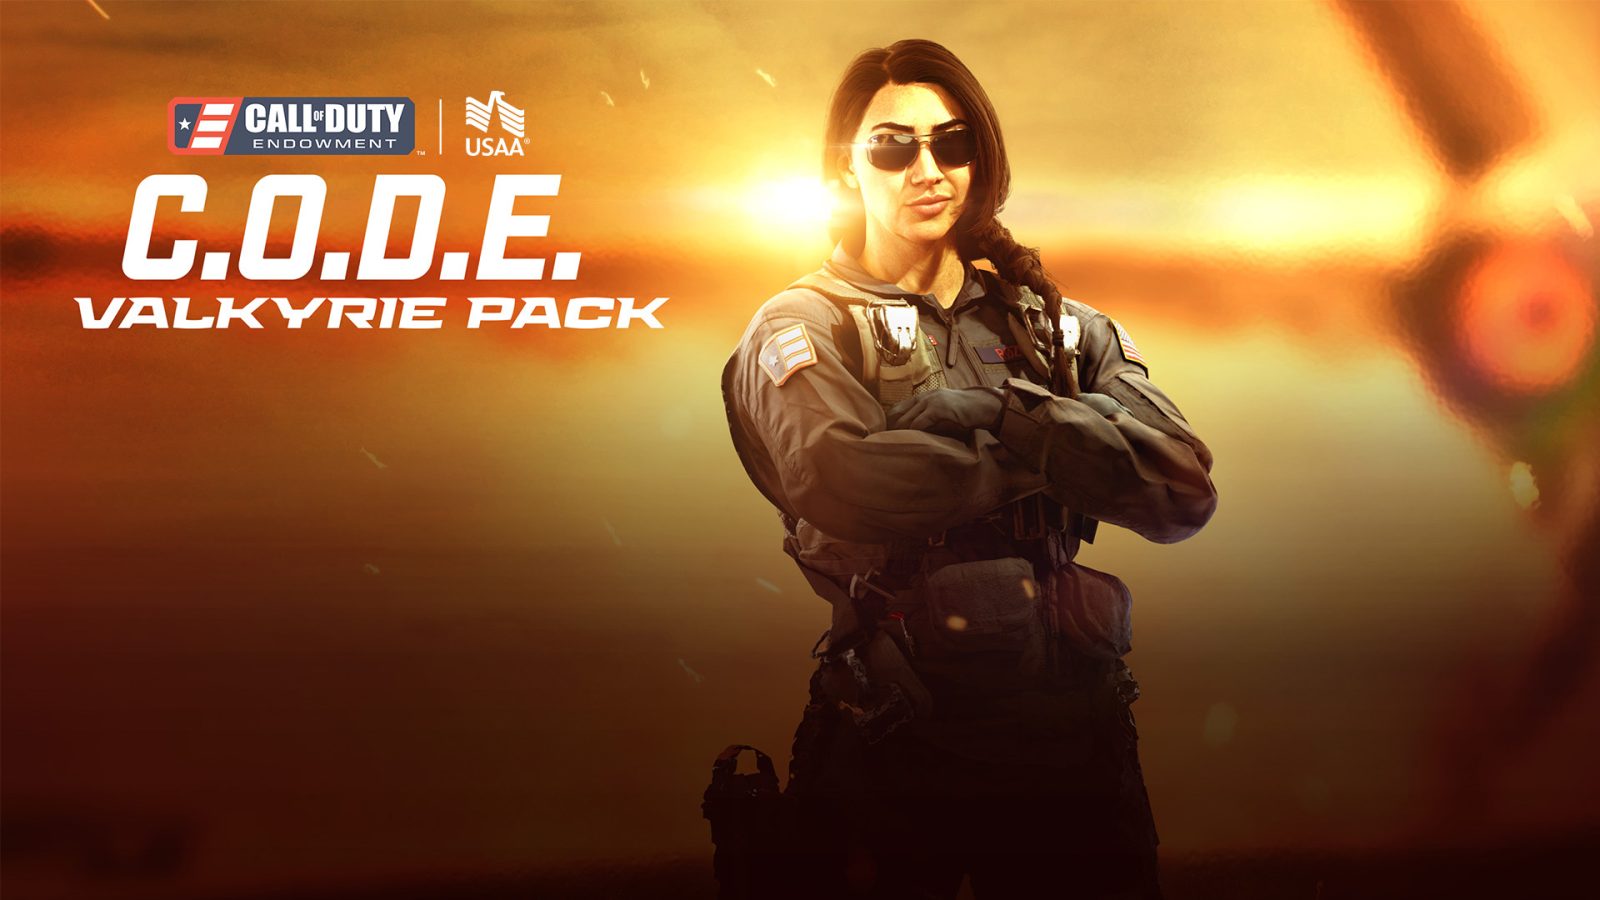 CALL OF DUTY PACK